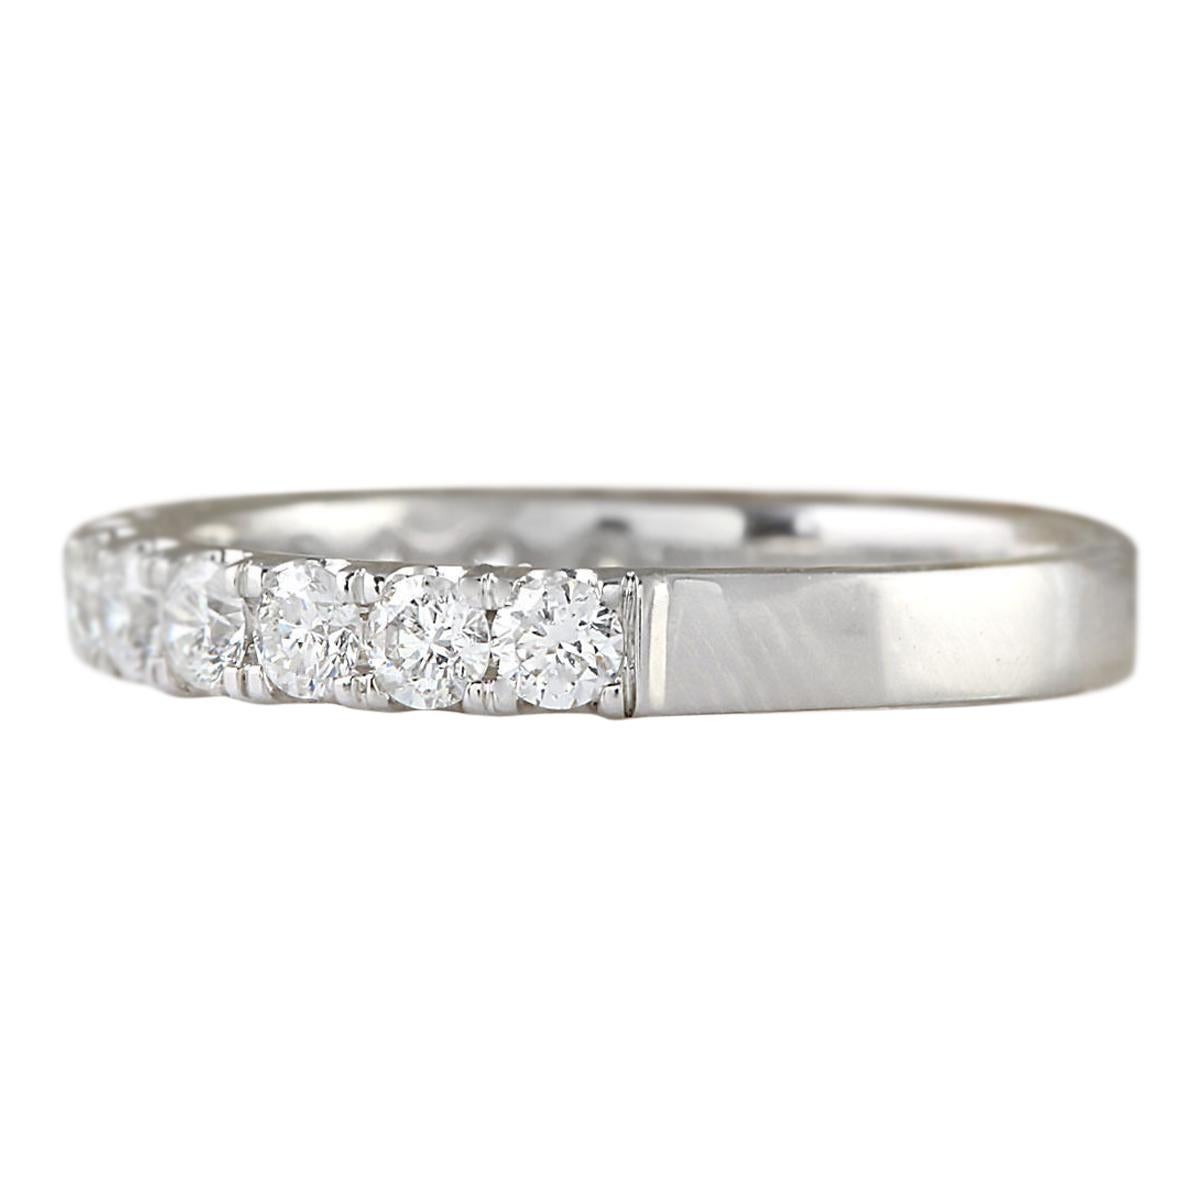 Stamped: 14K White Gold
Total Ring Weight: 2.5 Grams
Total Natural Diamond Weight is 0.80 Carat
Color: F-G, Clarity: VS2-SI1
Face Measures: 2.80 mm
Sku: [704179W]